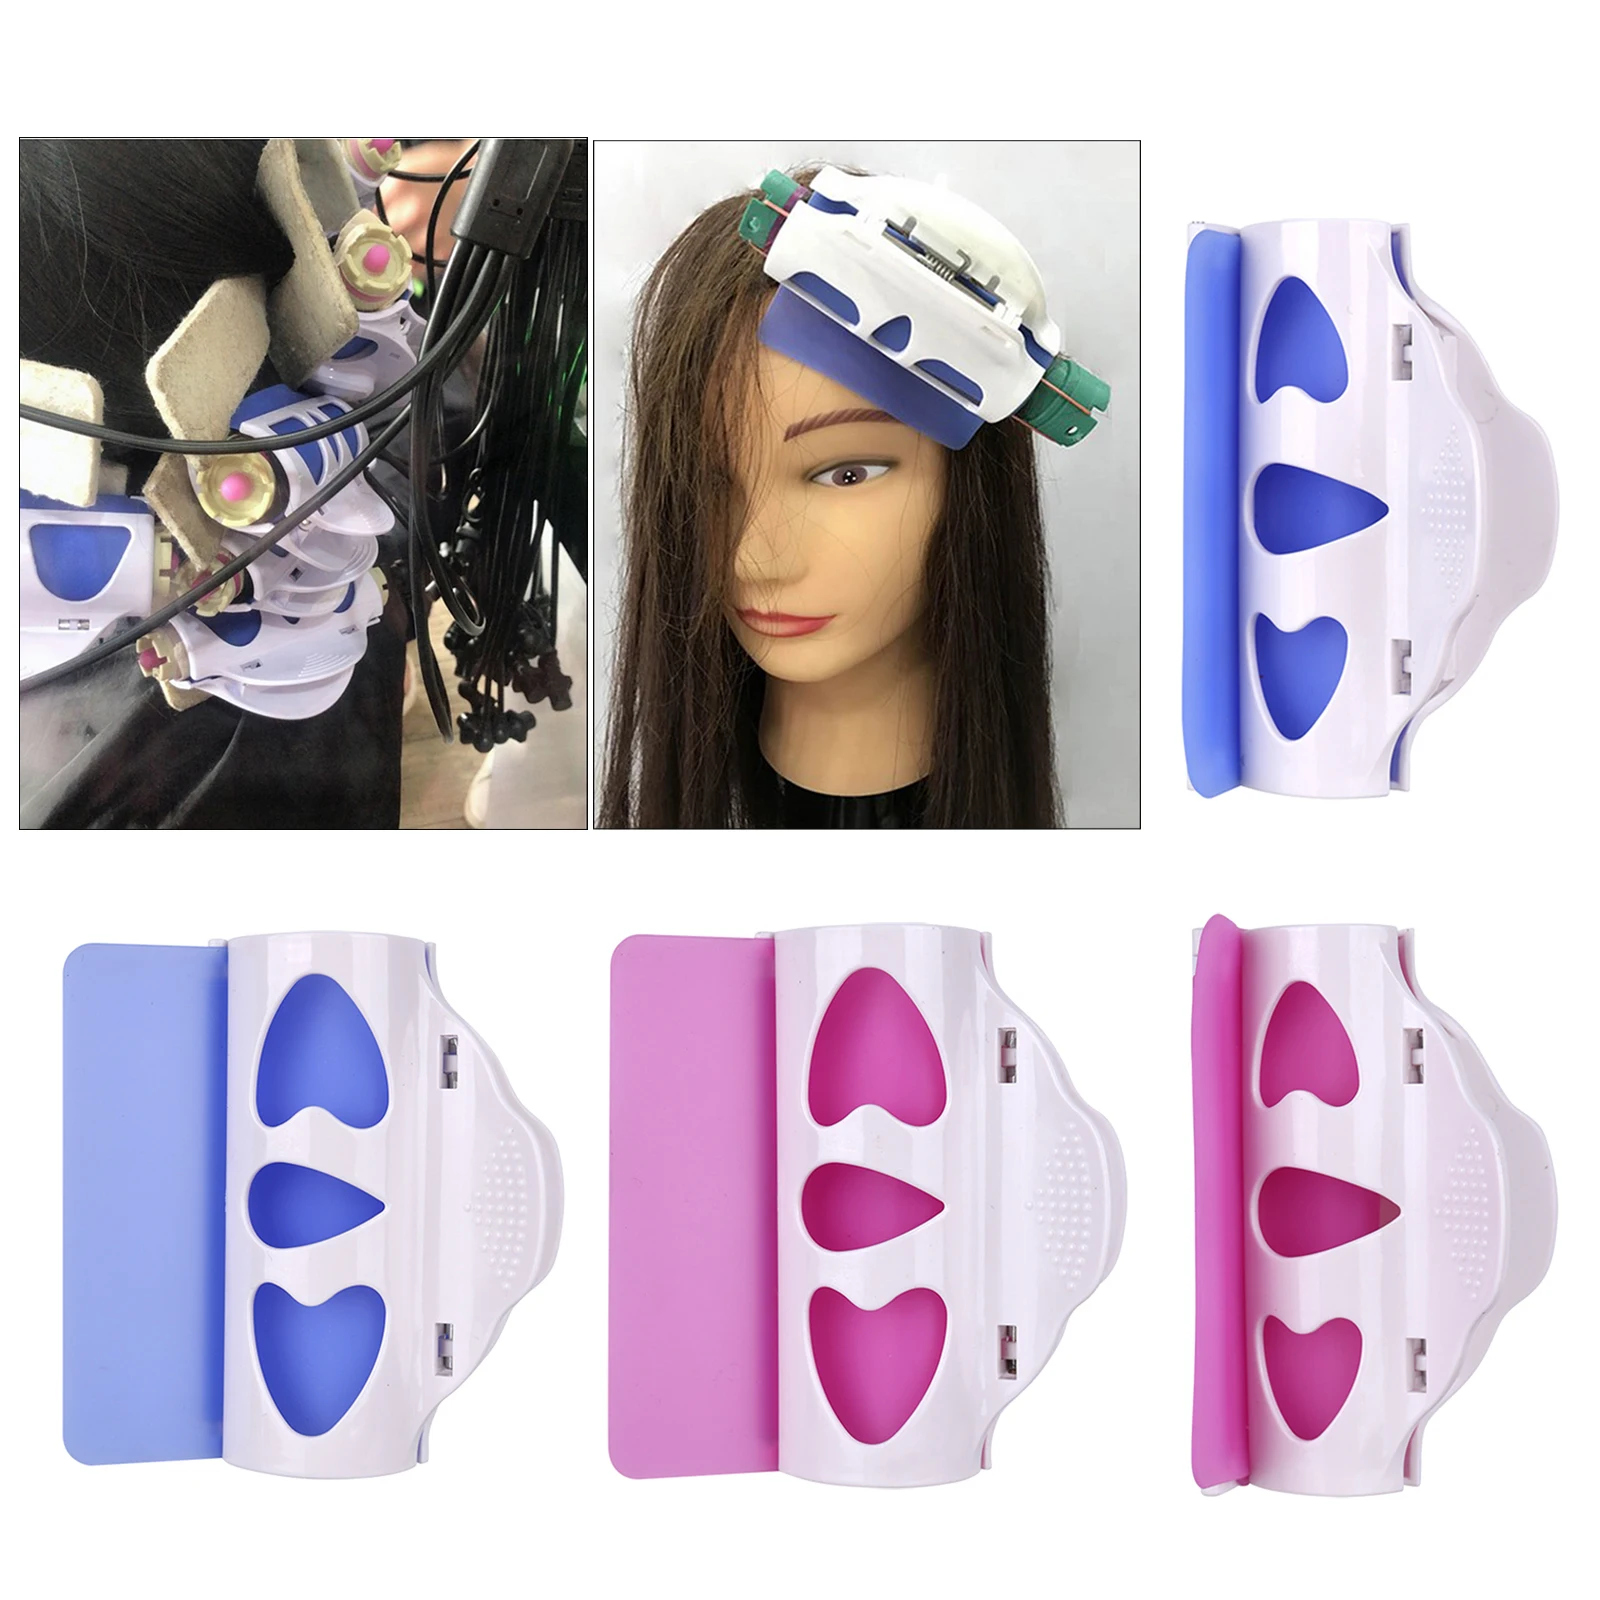 Professional Salon Barber Hair Curler Clip Perm Rolls w/Silicone Pad Hair Roller Hair Styling Tools